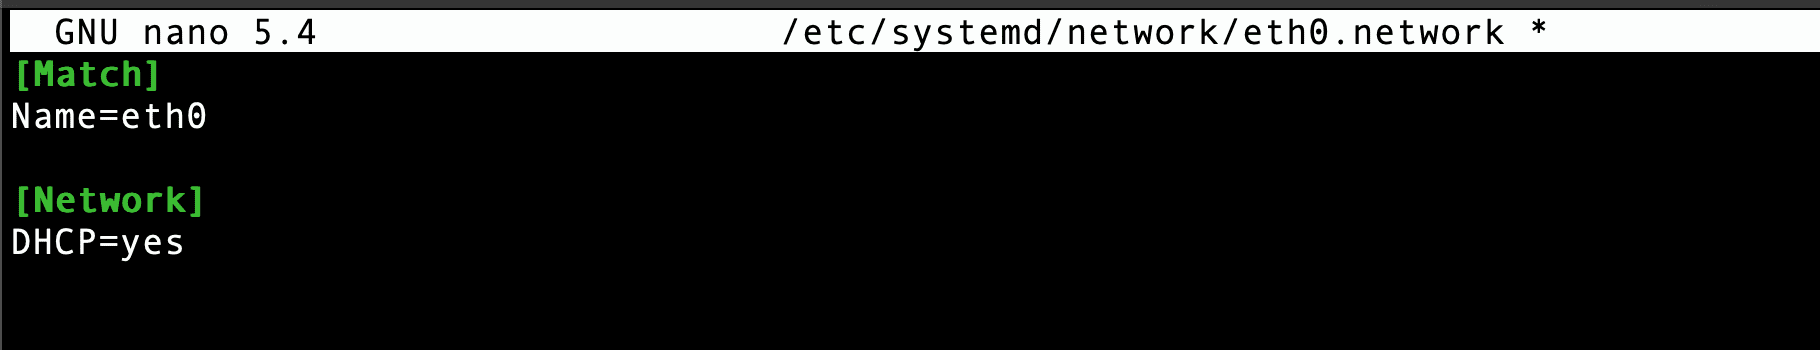 systemd networkd configuration